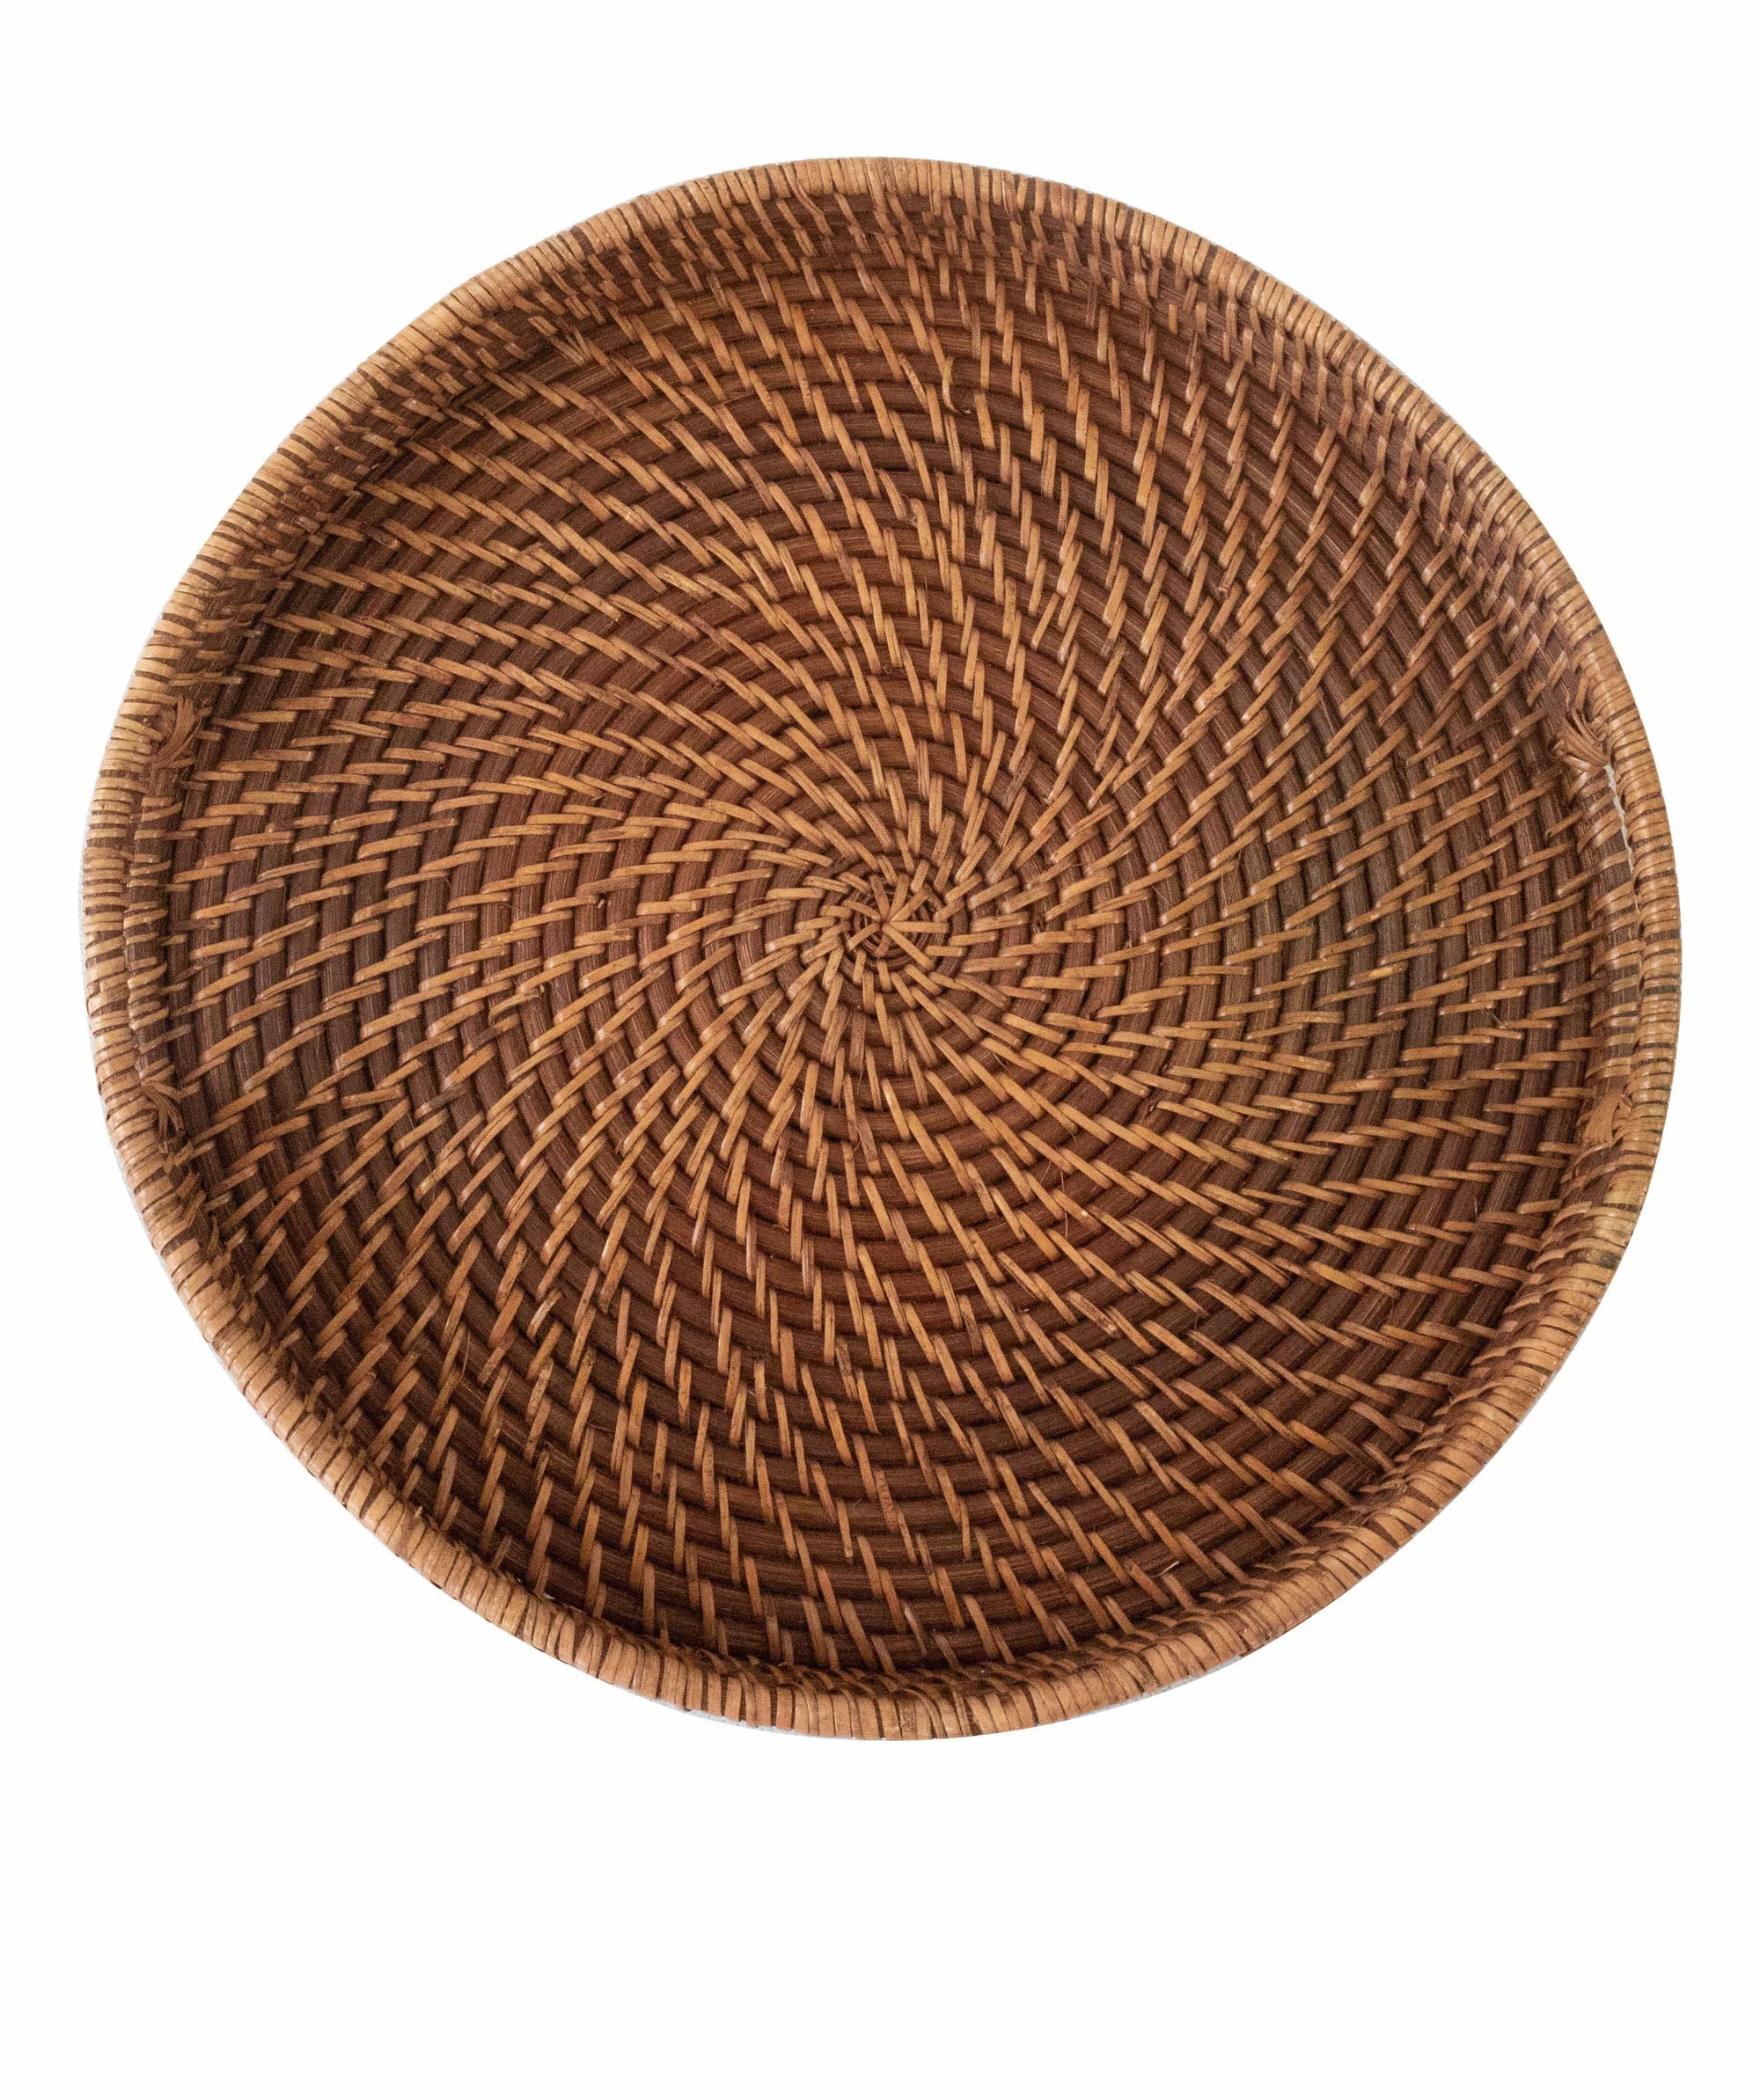 Round Wicker Serving Trays with Handles - 16"